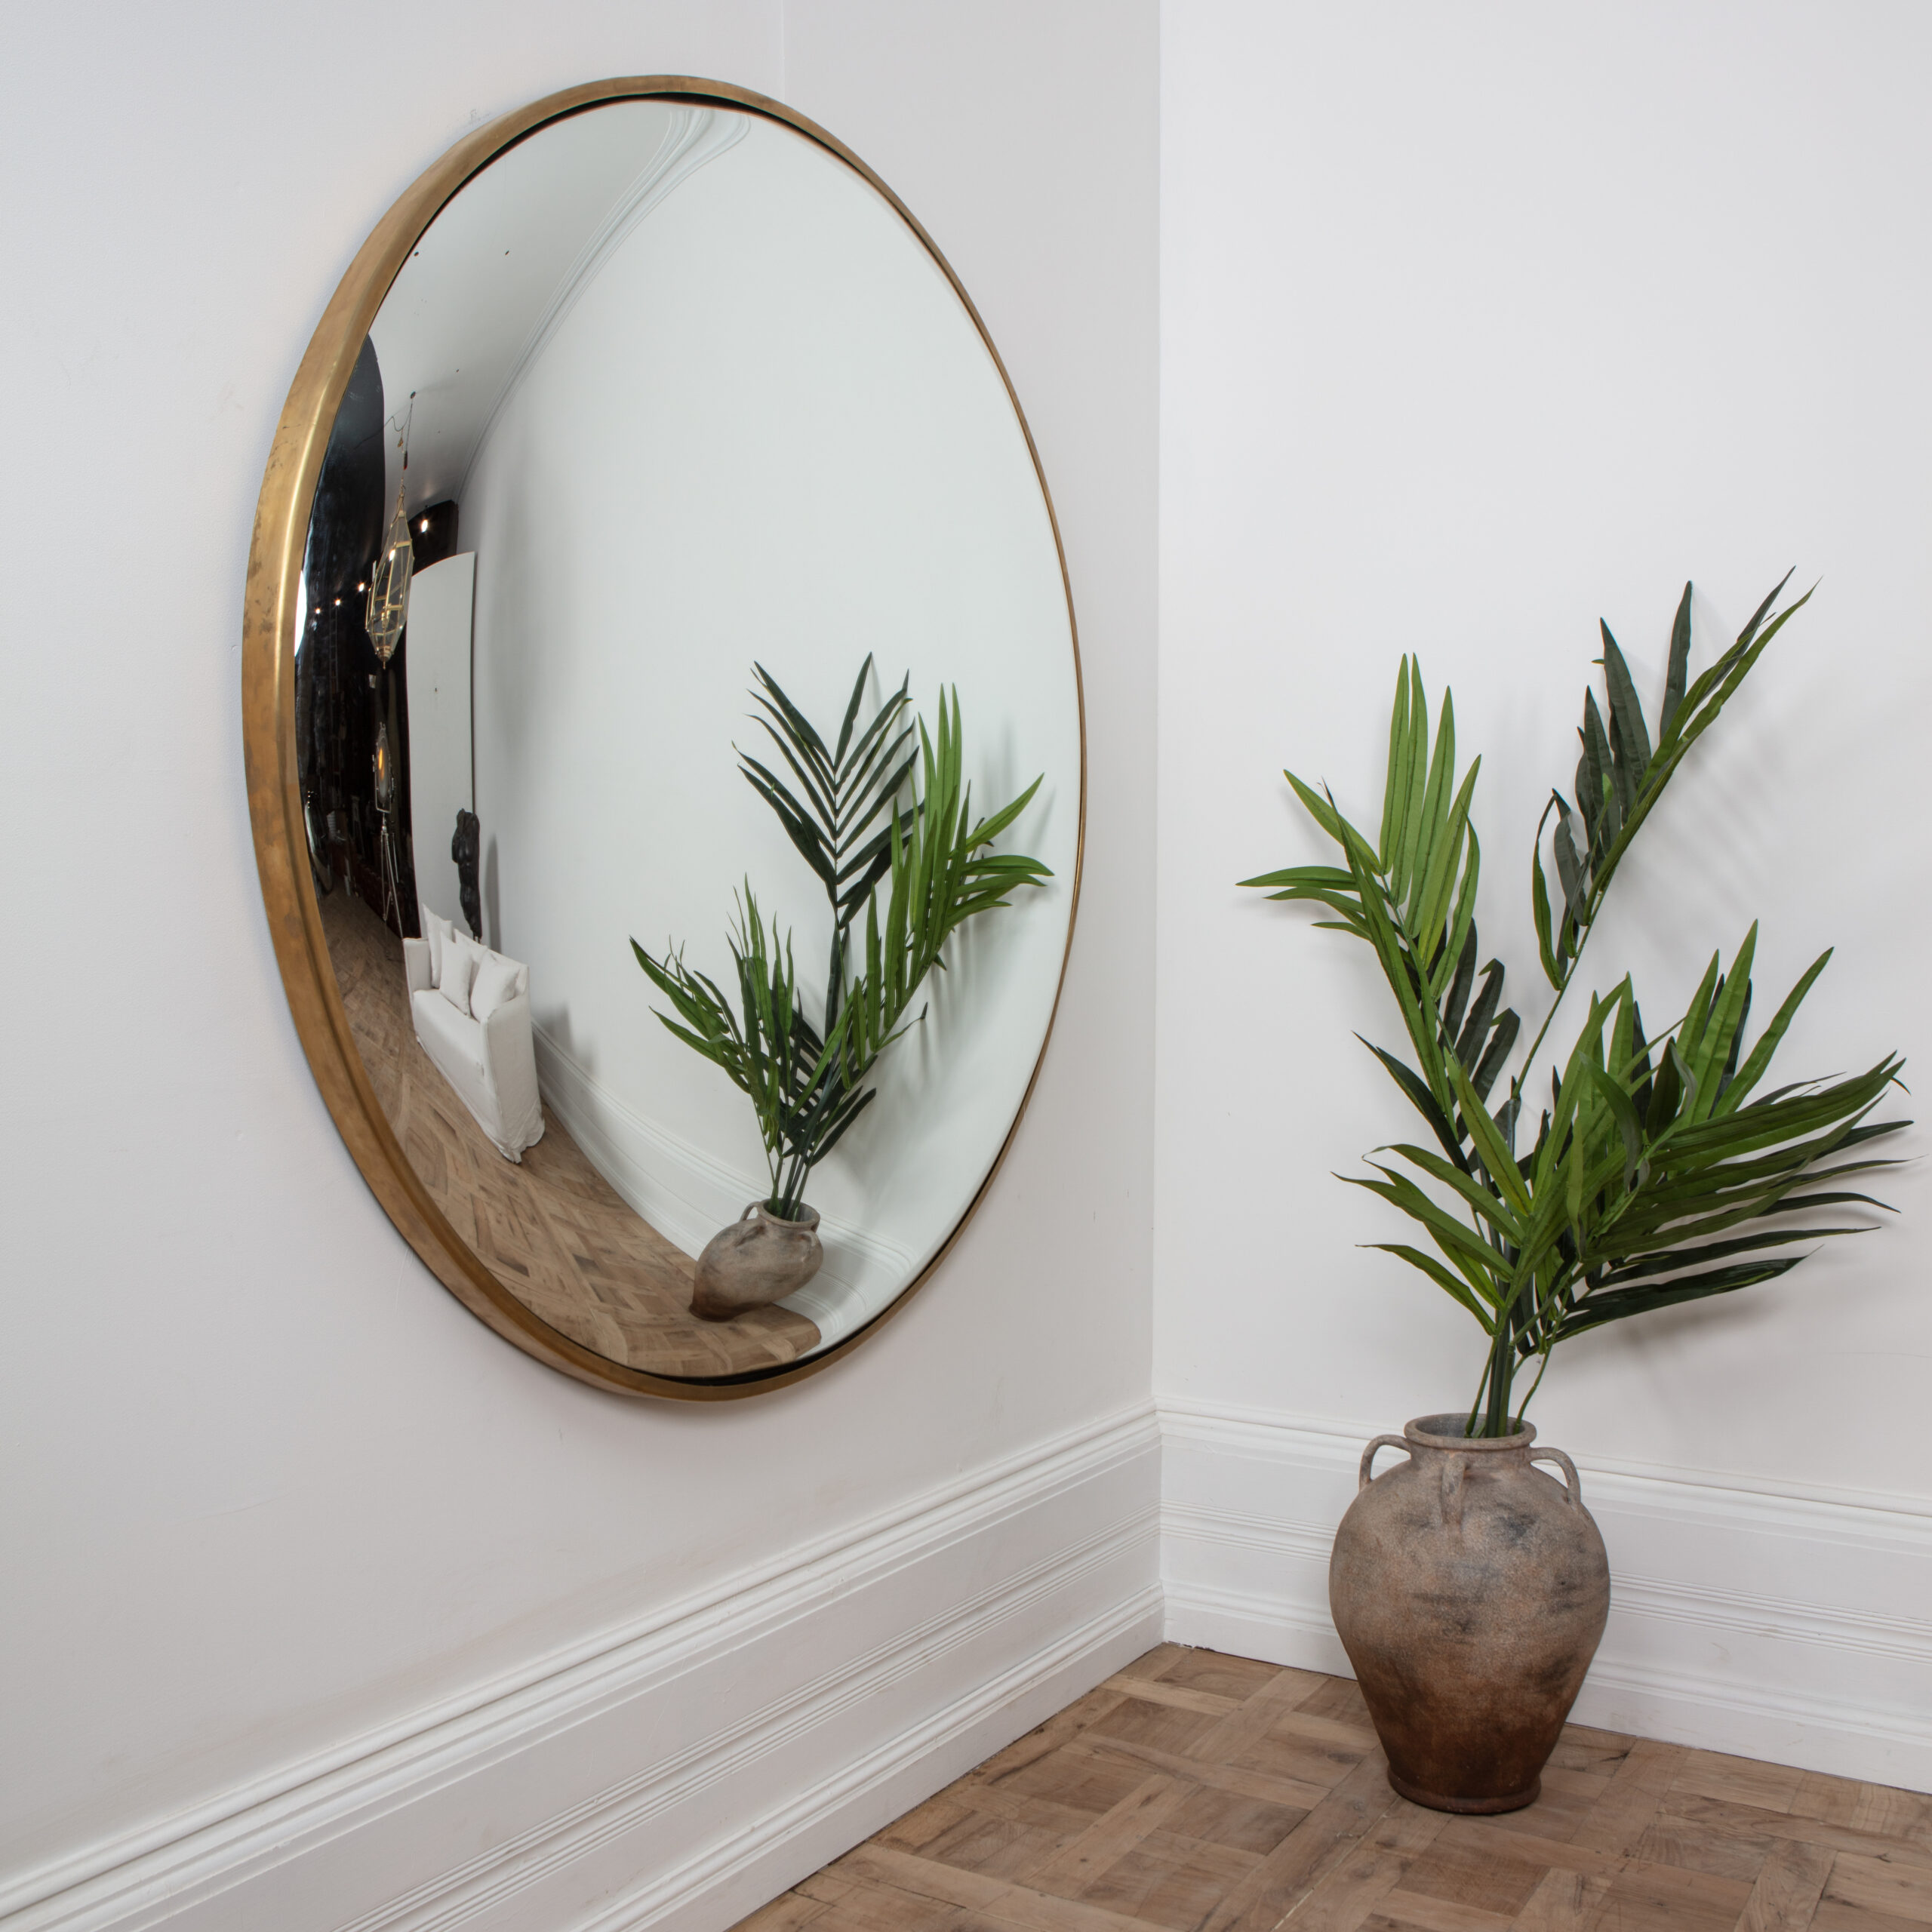 Relieve Stress While Working at Home with Convex Mirror Round